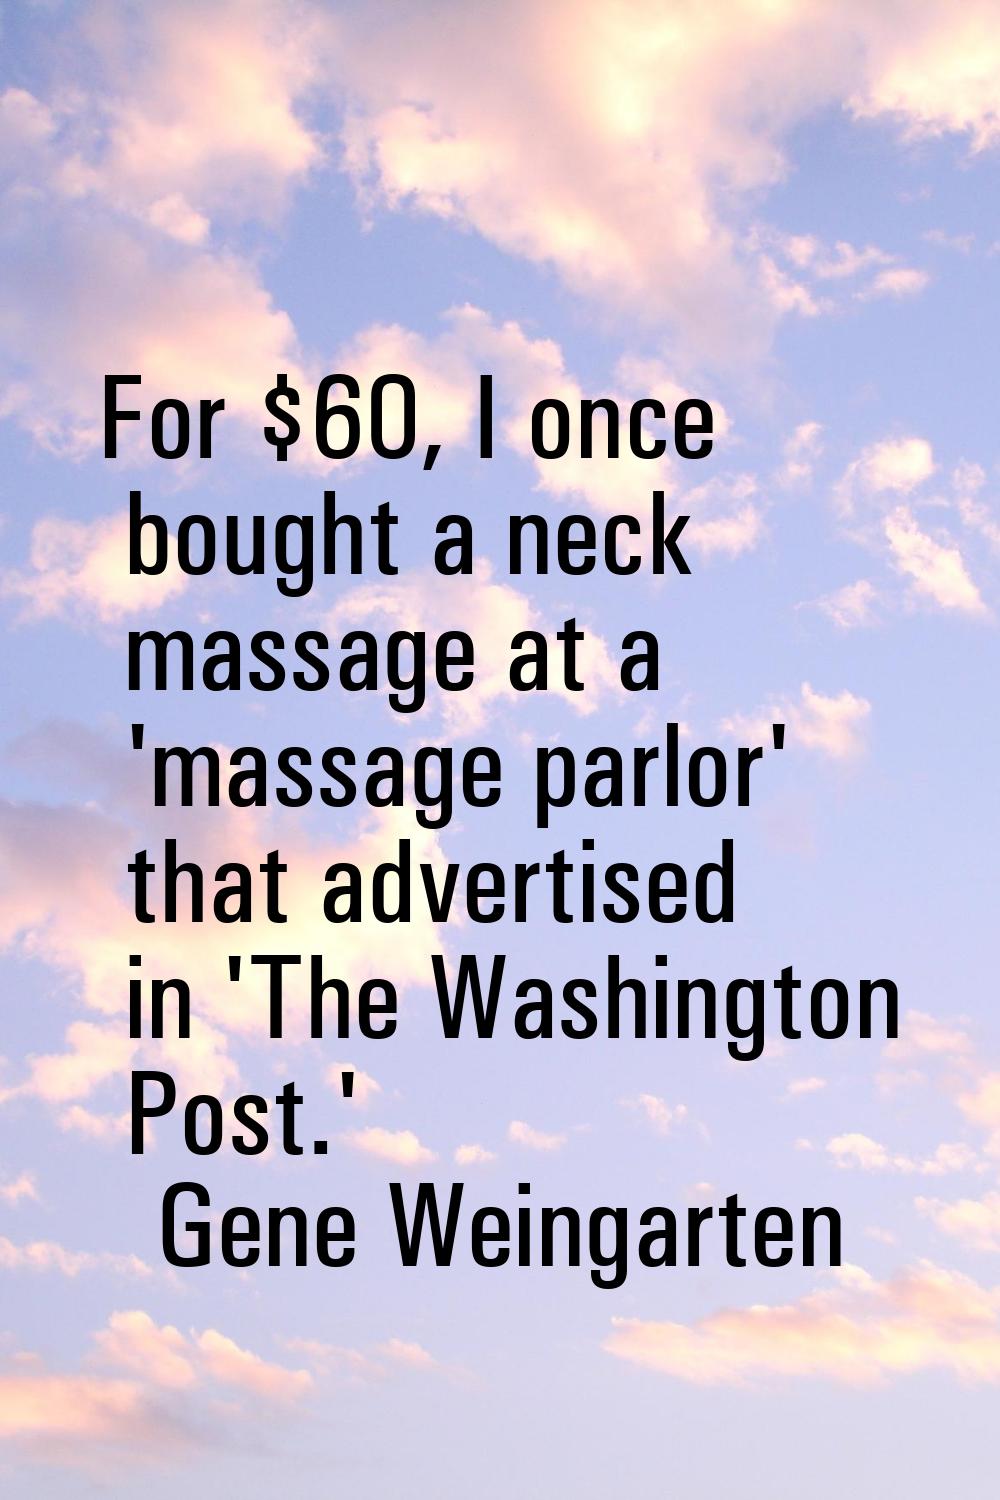 For $60, I once bought a neck massage at a 'massage parlor' that advertised in 'The Washington Post